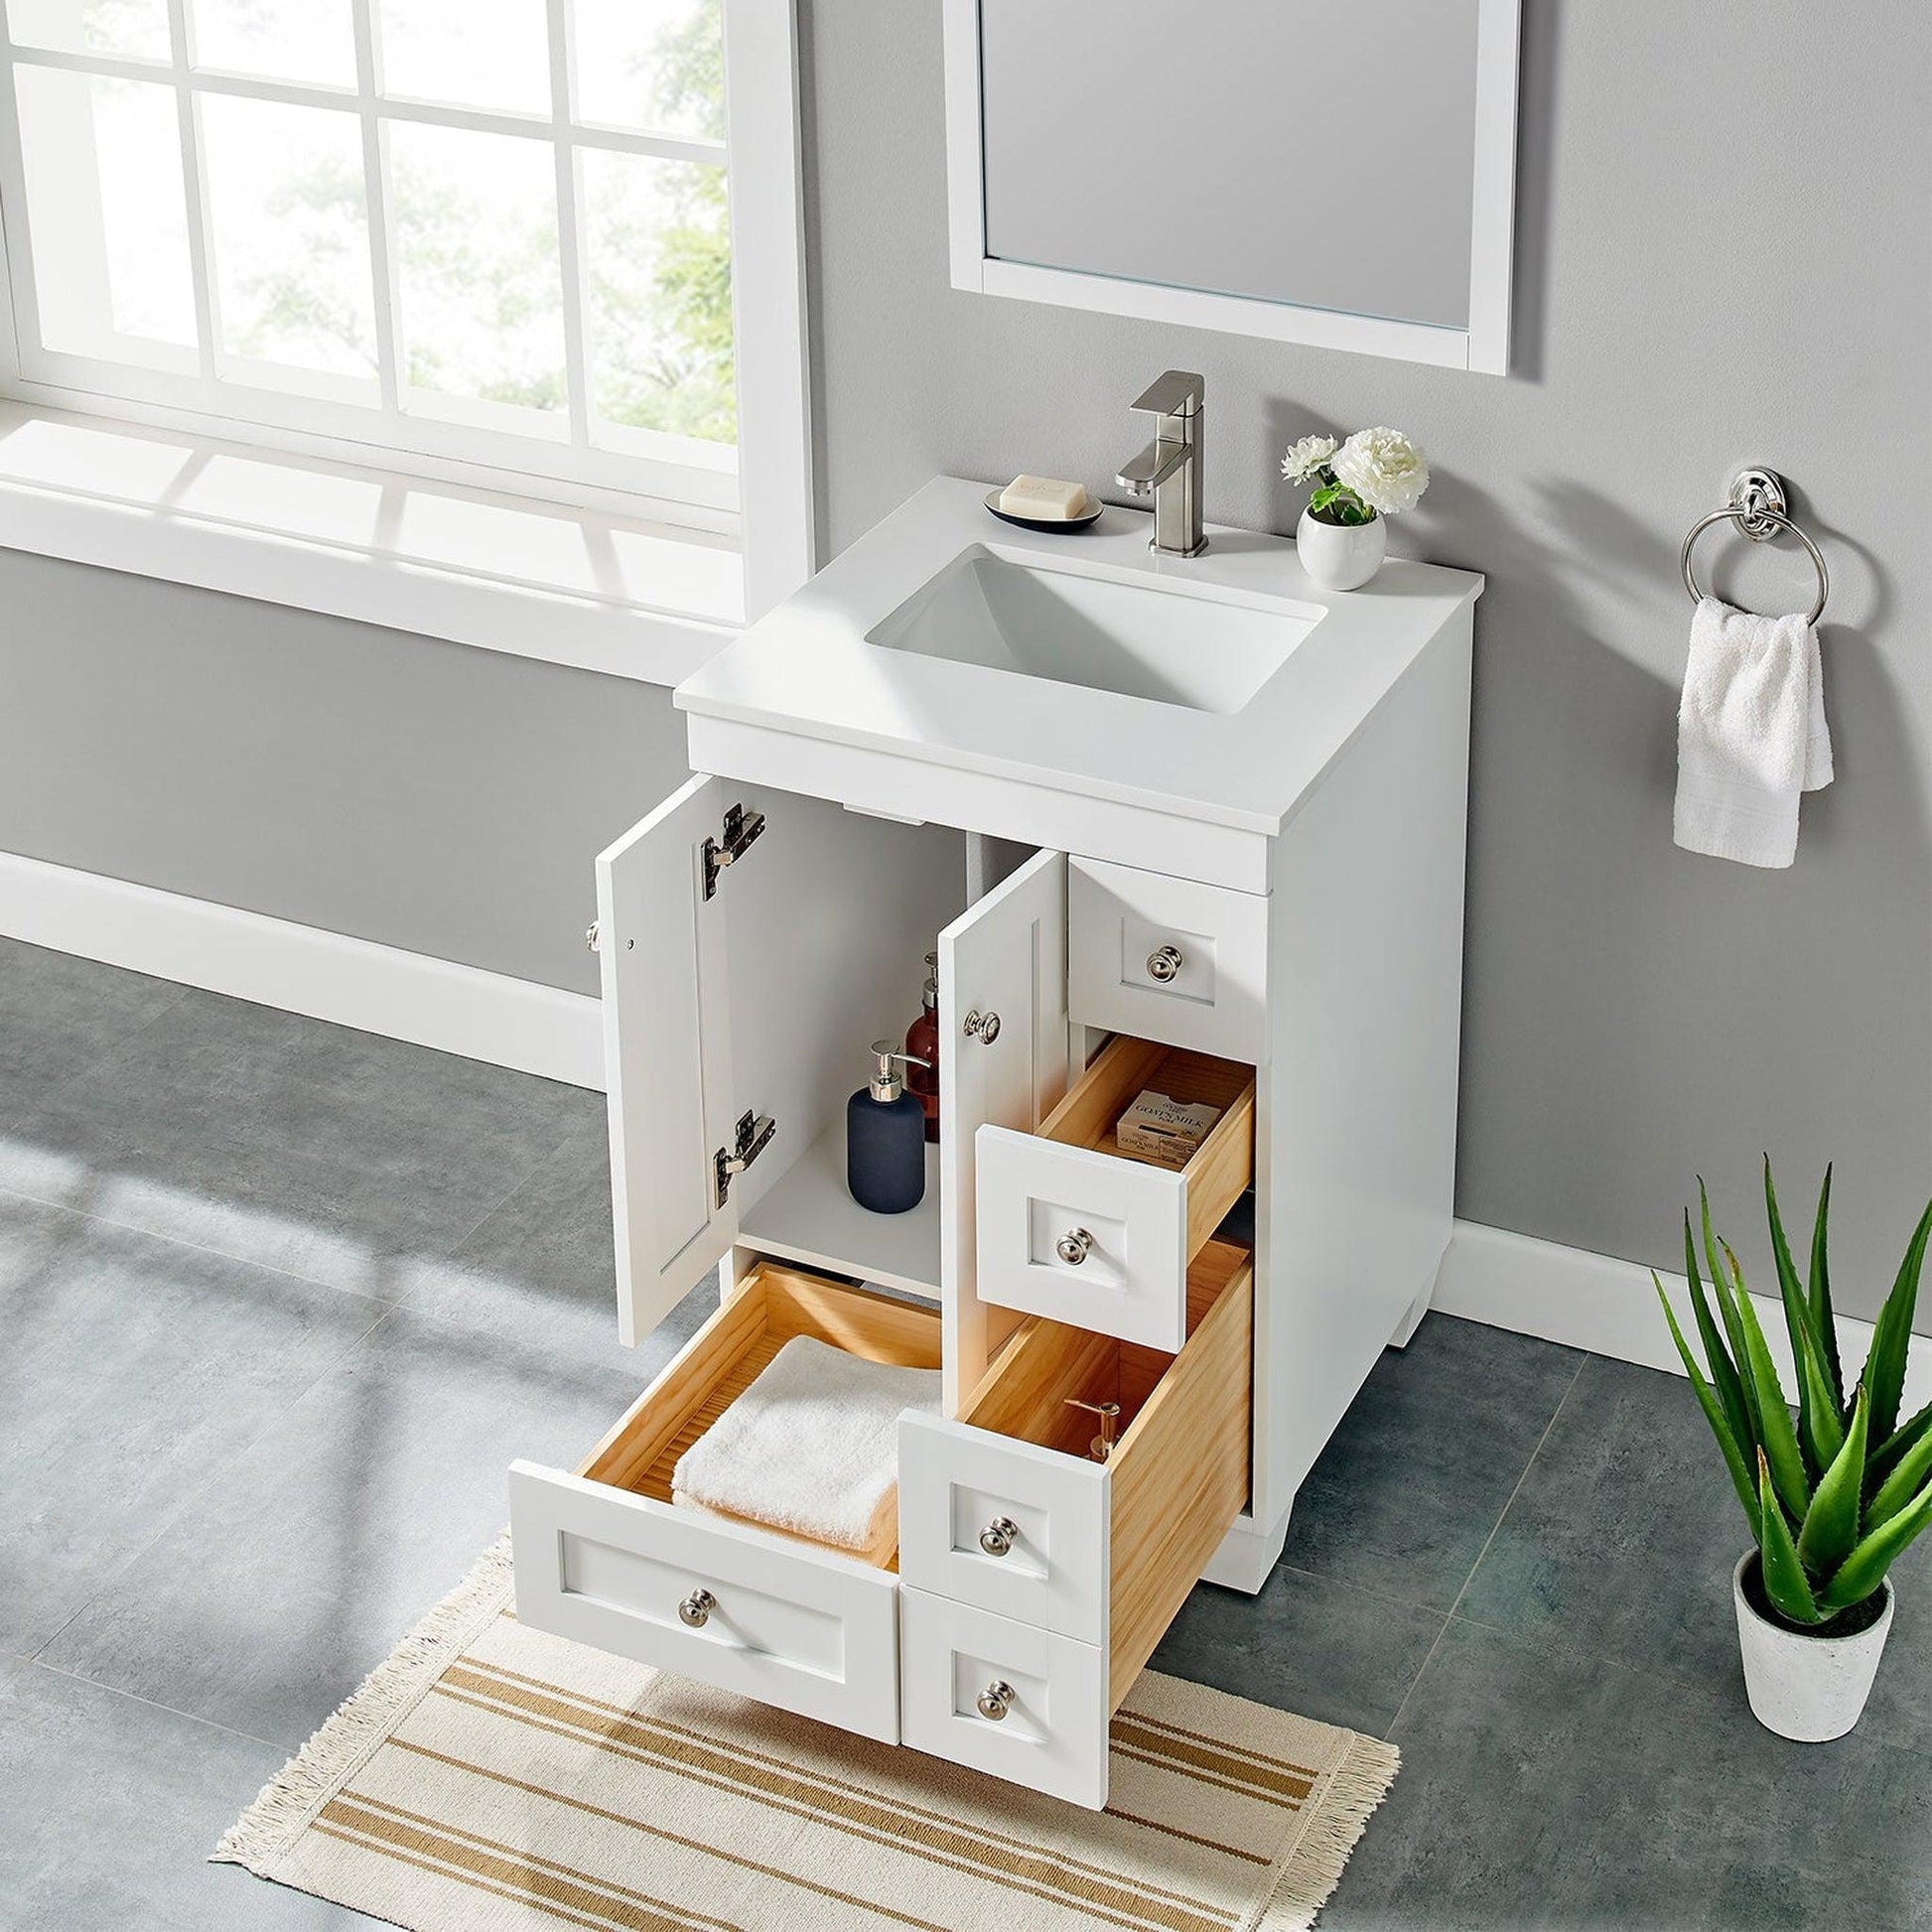 Eviva Acclaim 24" x 34" White Freestanding Bathroom Vanity With White Man-Made Stone Countertop and Single Undermount Sink